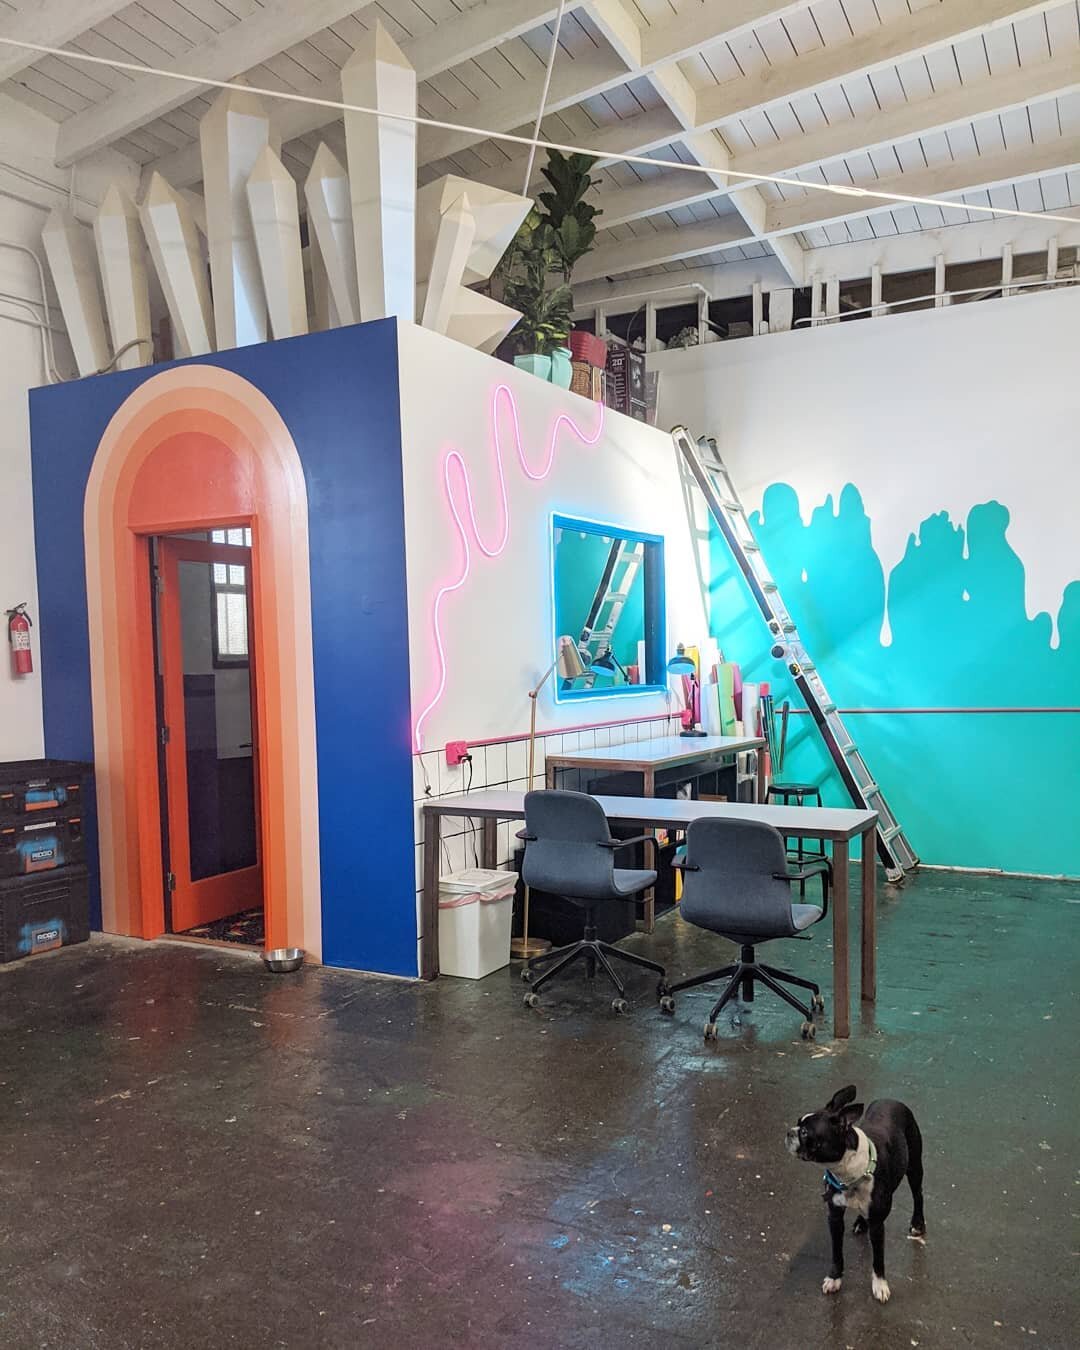 Check out our somewhat new and highly improved, space of business. We are stoked to produce all of your creative endeavors and build new immersive worlds together. Come visit us and tell us about all of your dreams!
🍾🎈🎊🎨🖌️🔨 #artmafia #community